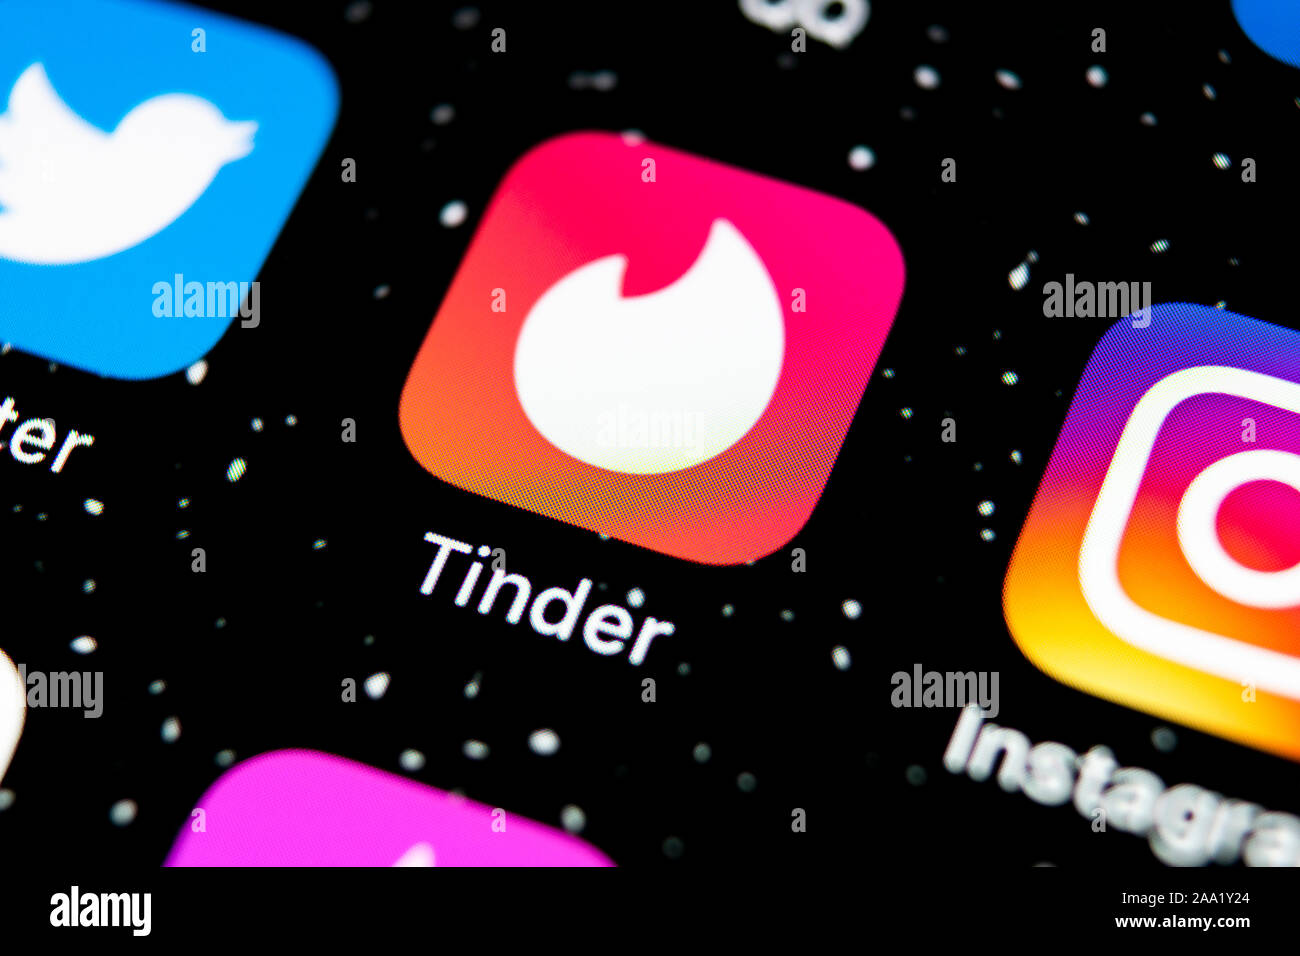 Sankt-Petersburg, Russia, February 3, 2019: Tinder application icon on Apple iPhone X screen close-up. Tinder app icon. Tinder application. Social med Stock Photo